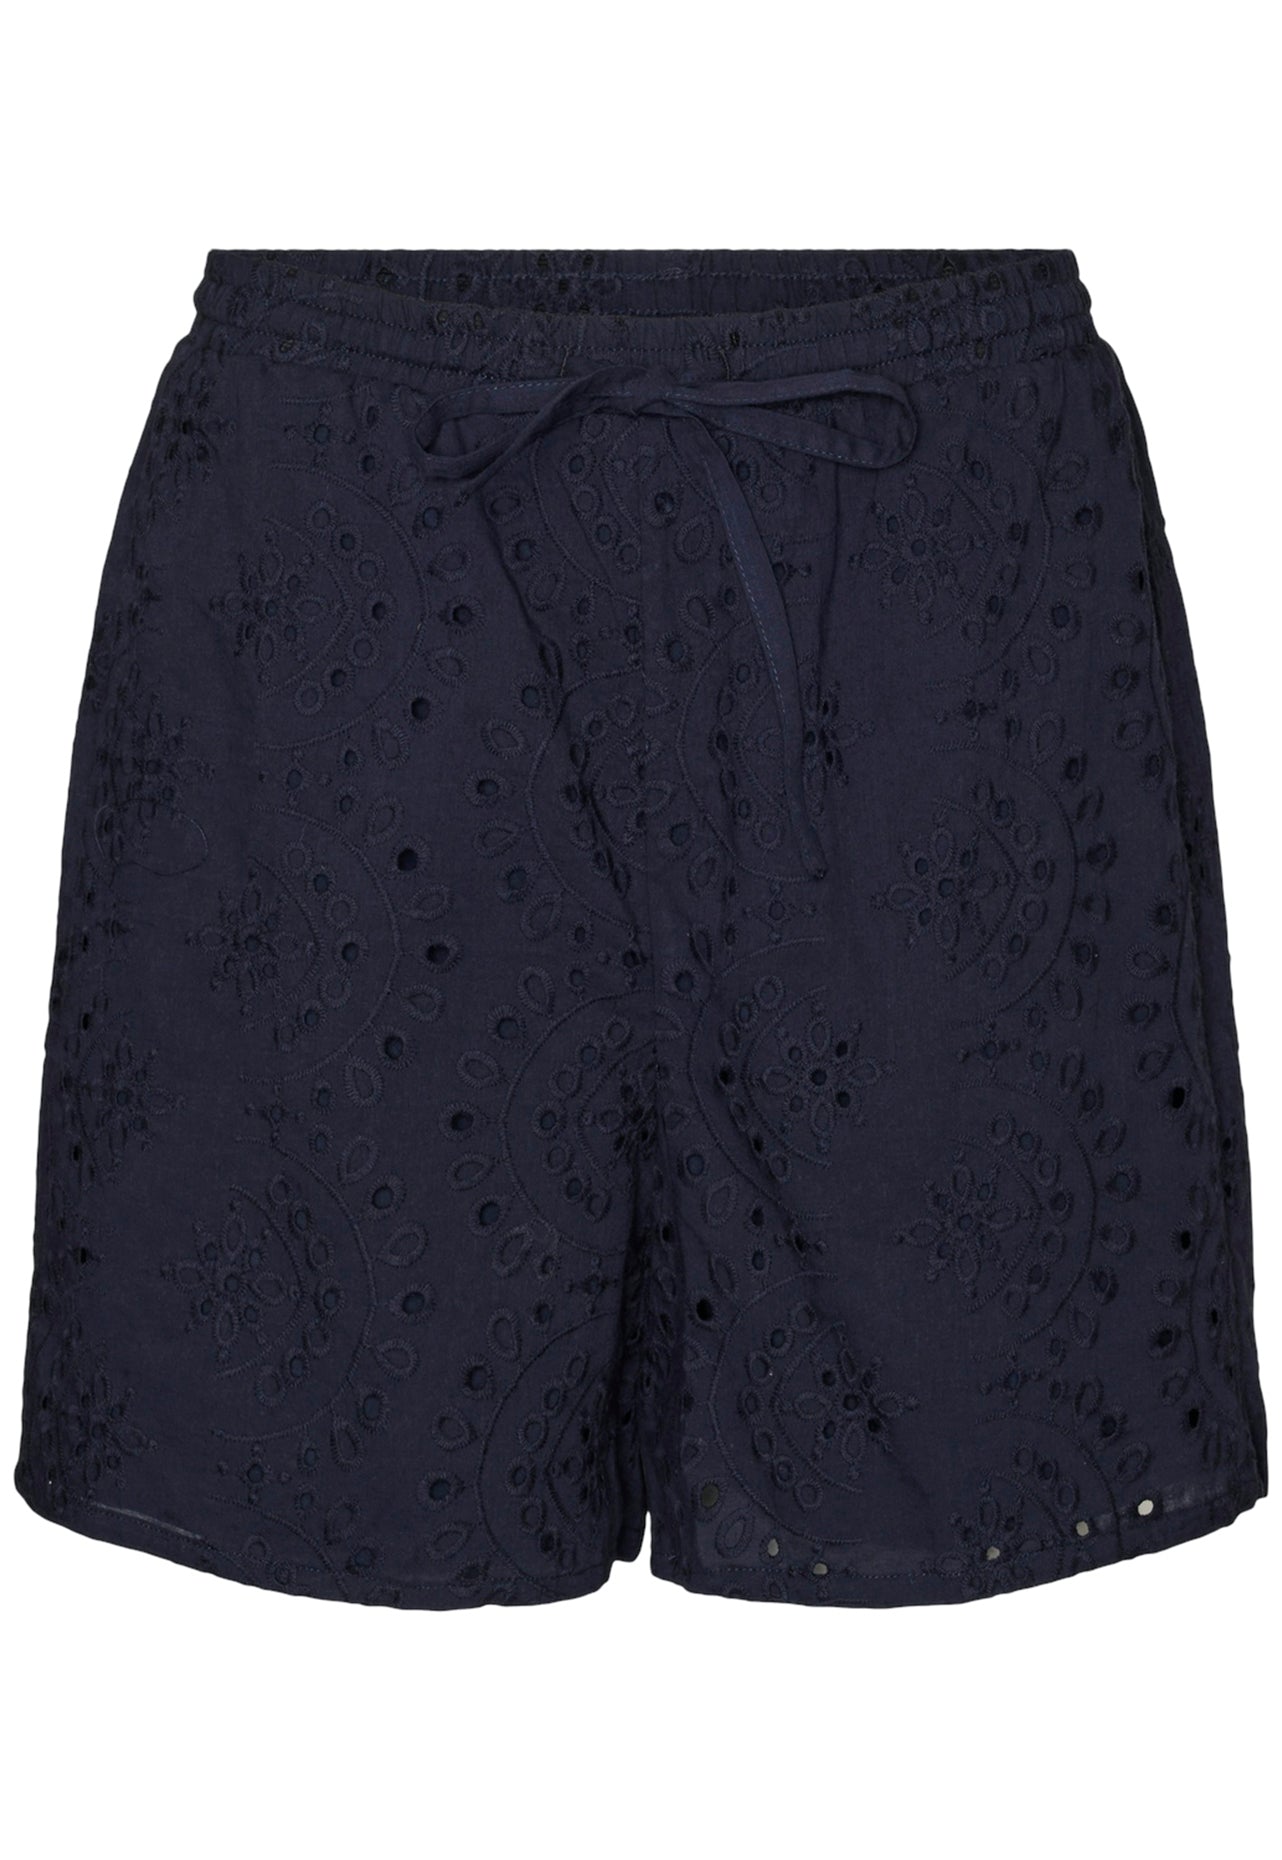 VERO MODA Hay Broderie Anglaise Lace Cotton Co-ord Shorts in Navy Blue - One Nation Clothing